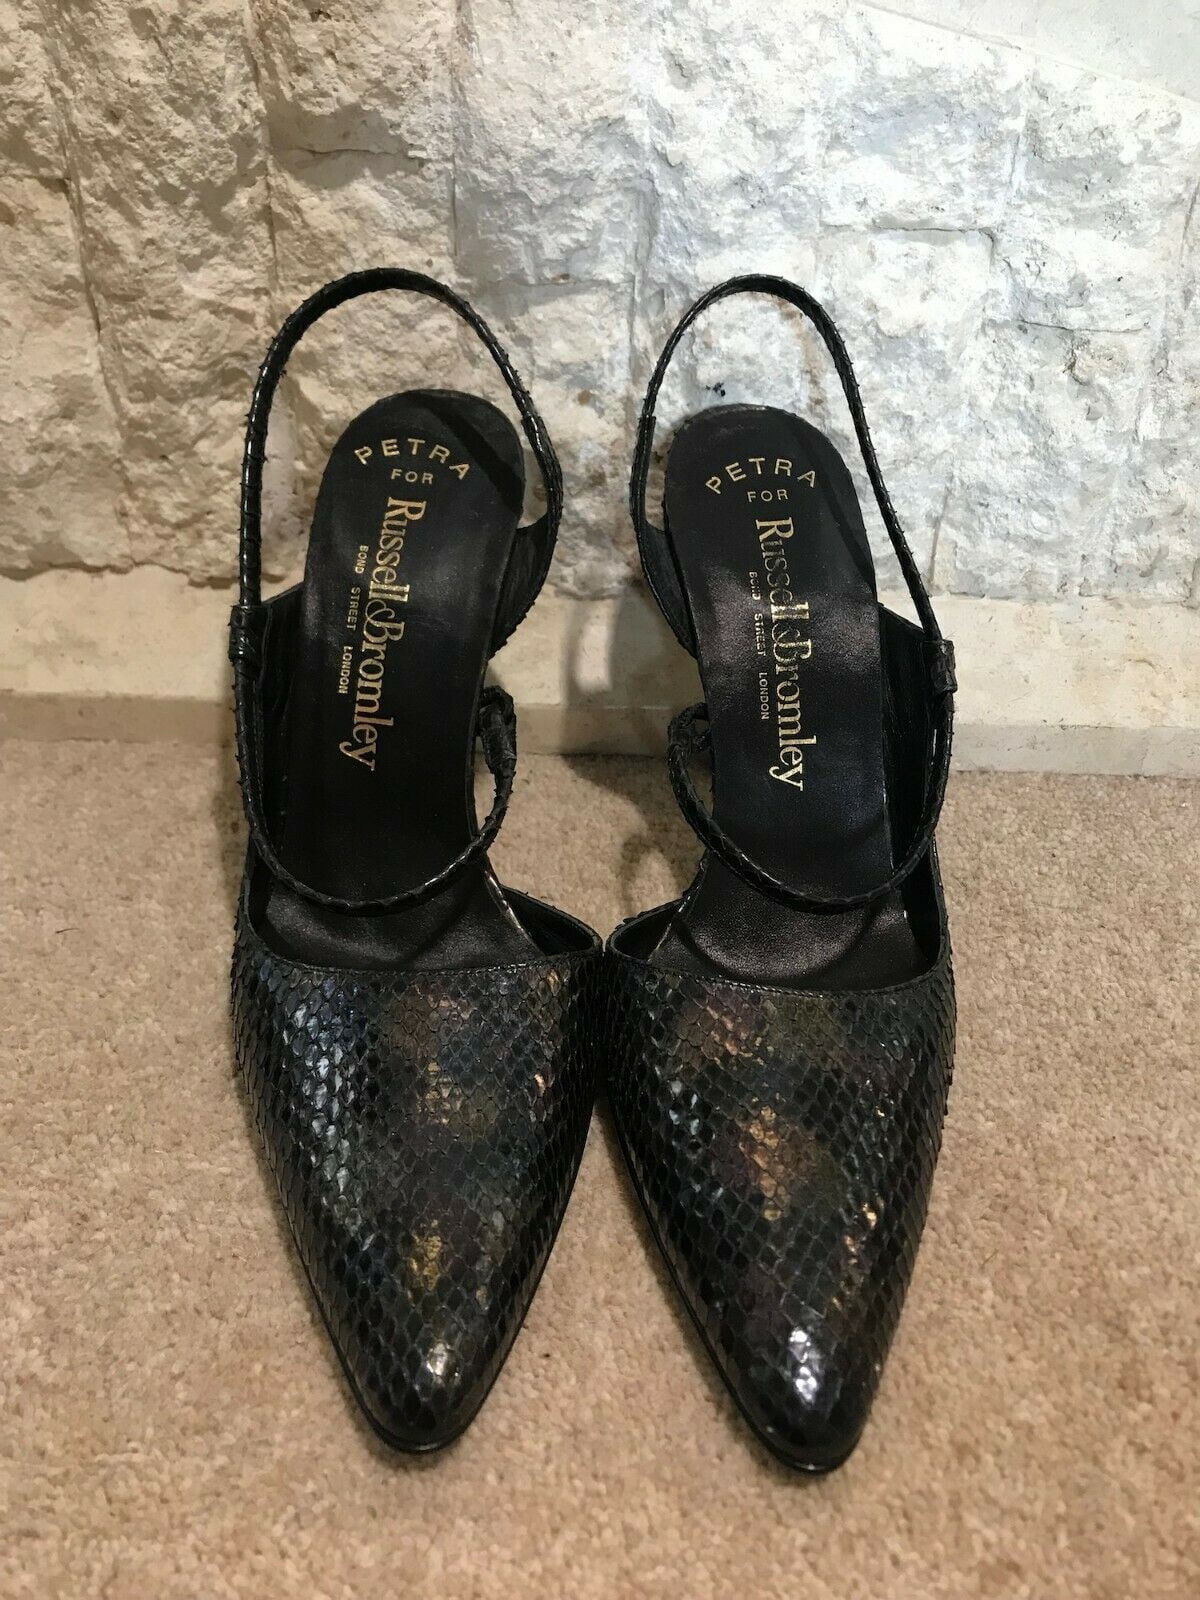 Russell & Bromley Women's Petrol Black Leather Slingback Shoes UK 4 New in original box Timeless Fashions